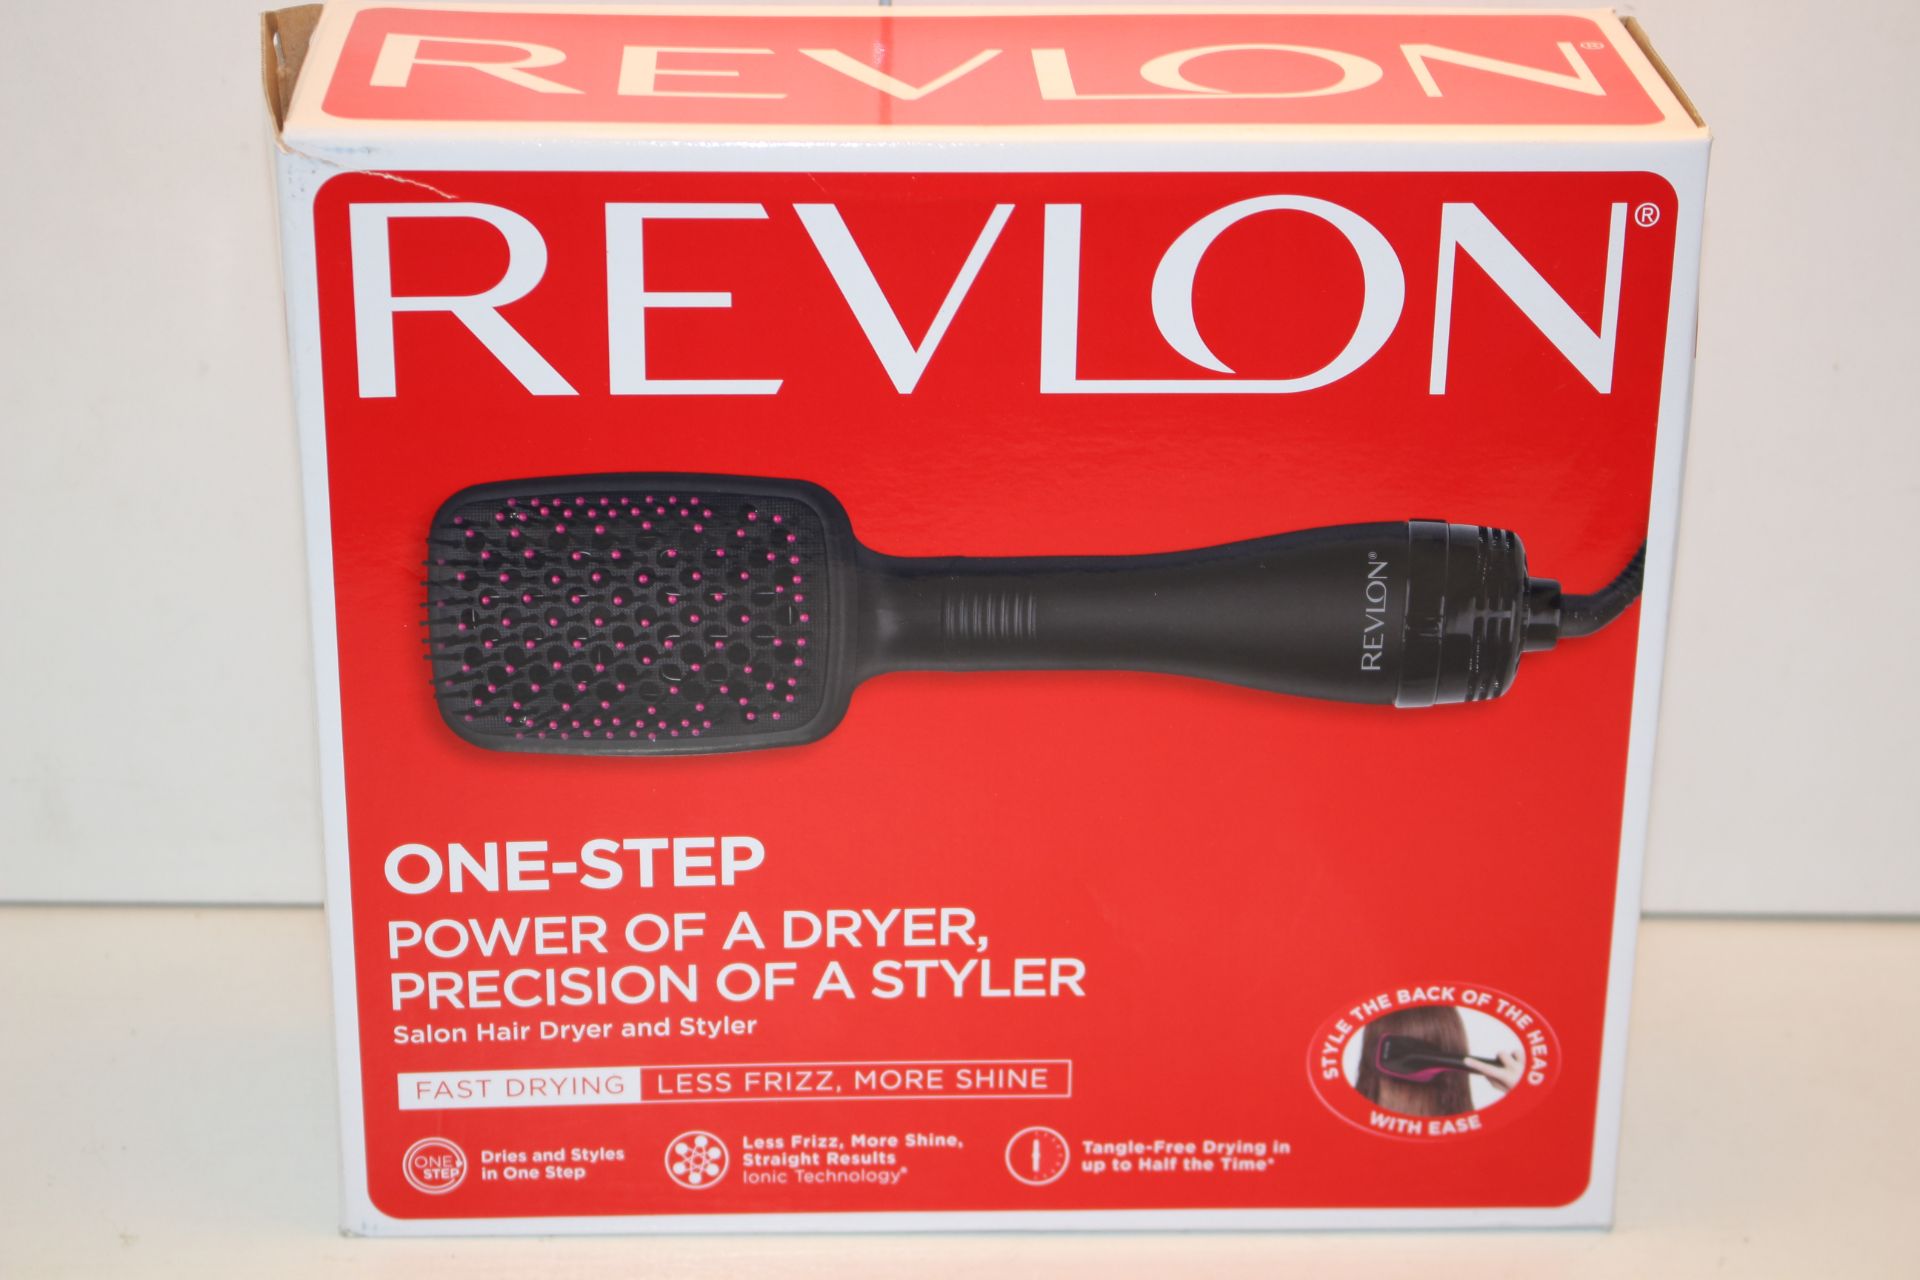 BOXED REVLON ONE-STEP POWER OF A DRYER PRECISION OF A STYLER SALON HAIR DRYER AND STYLER RRP £52.